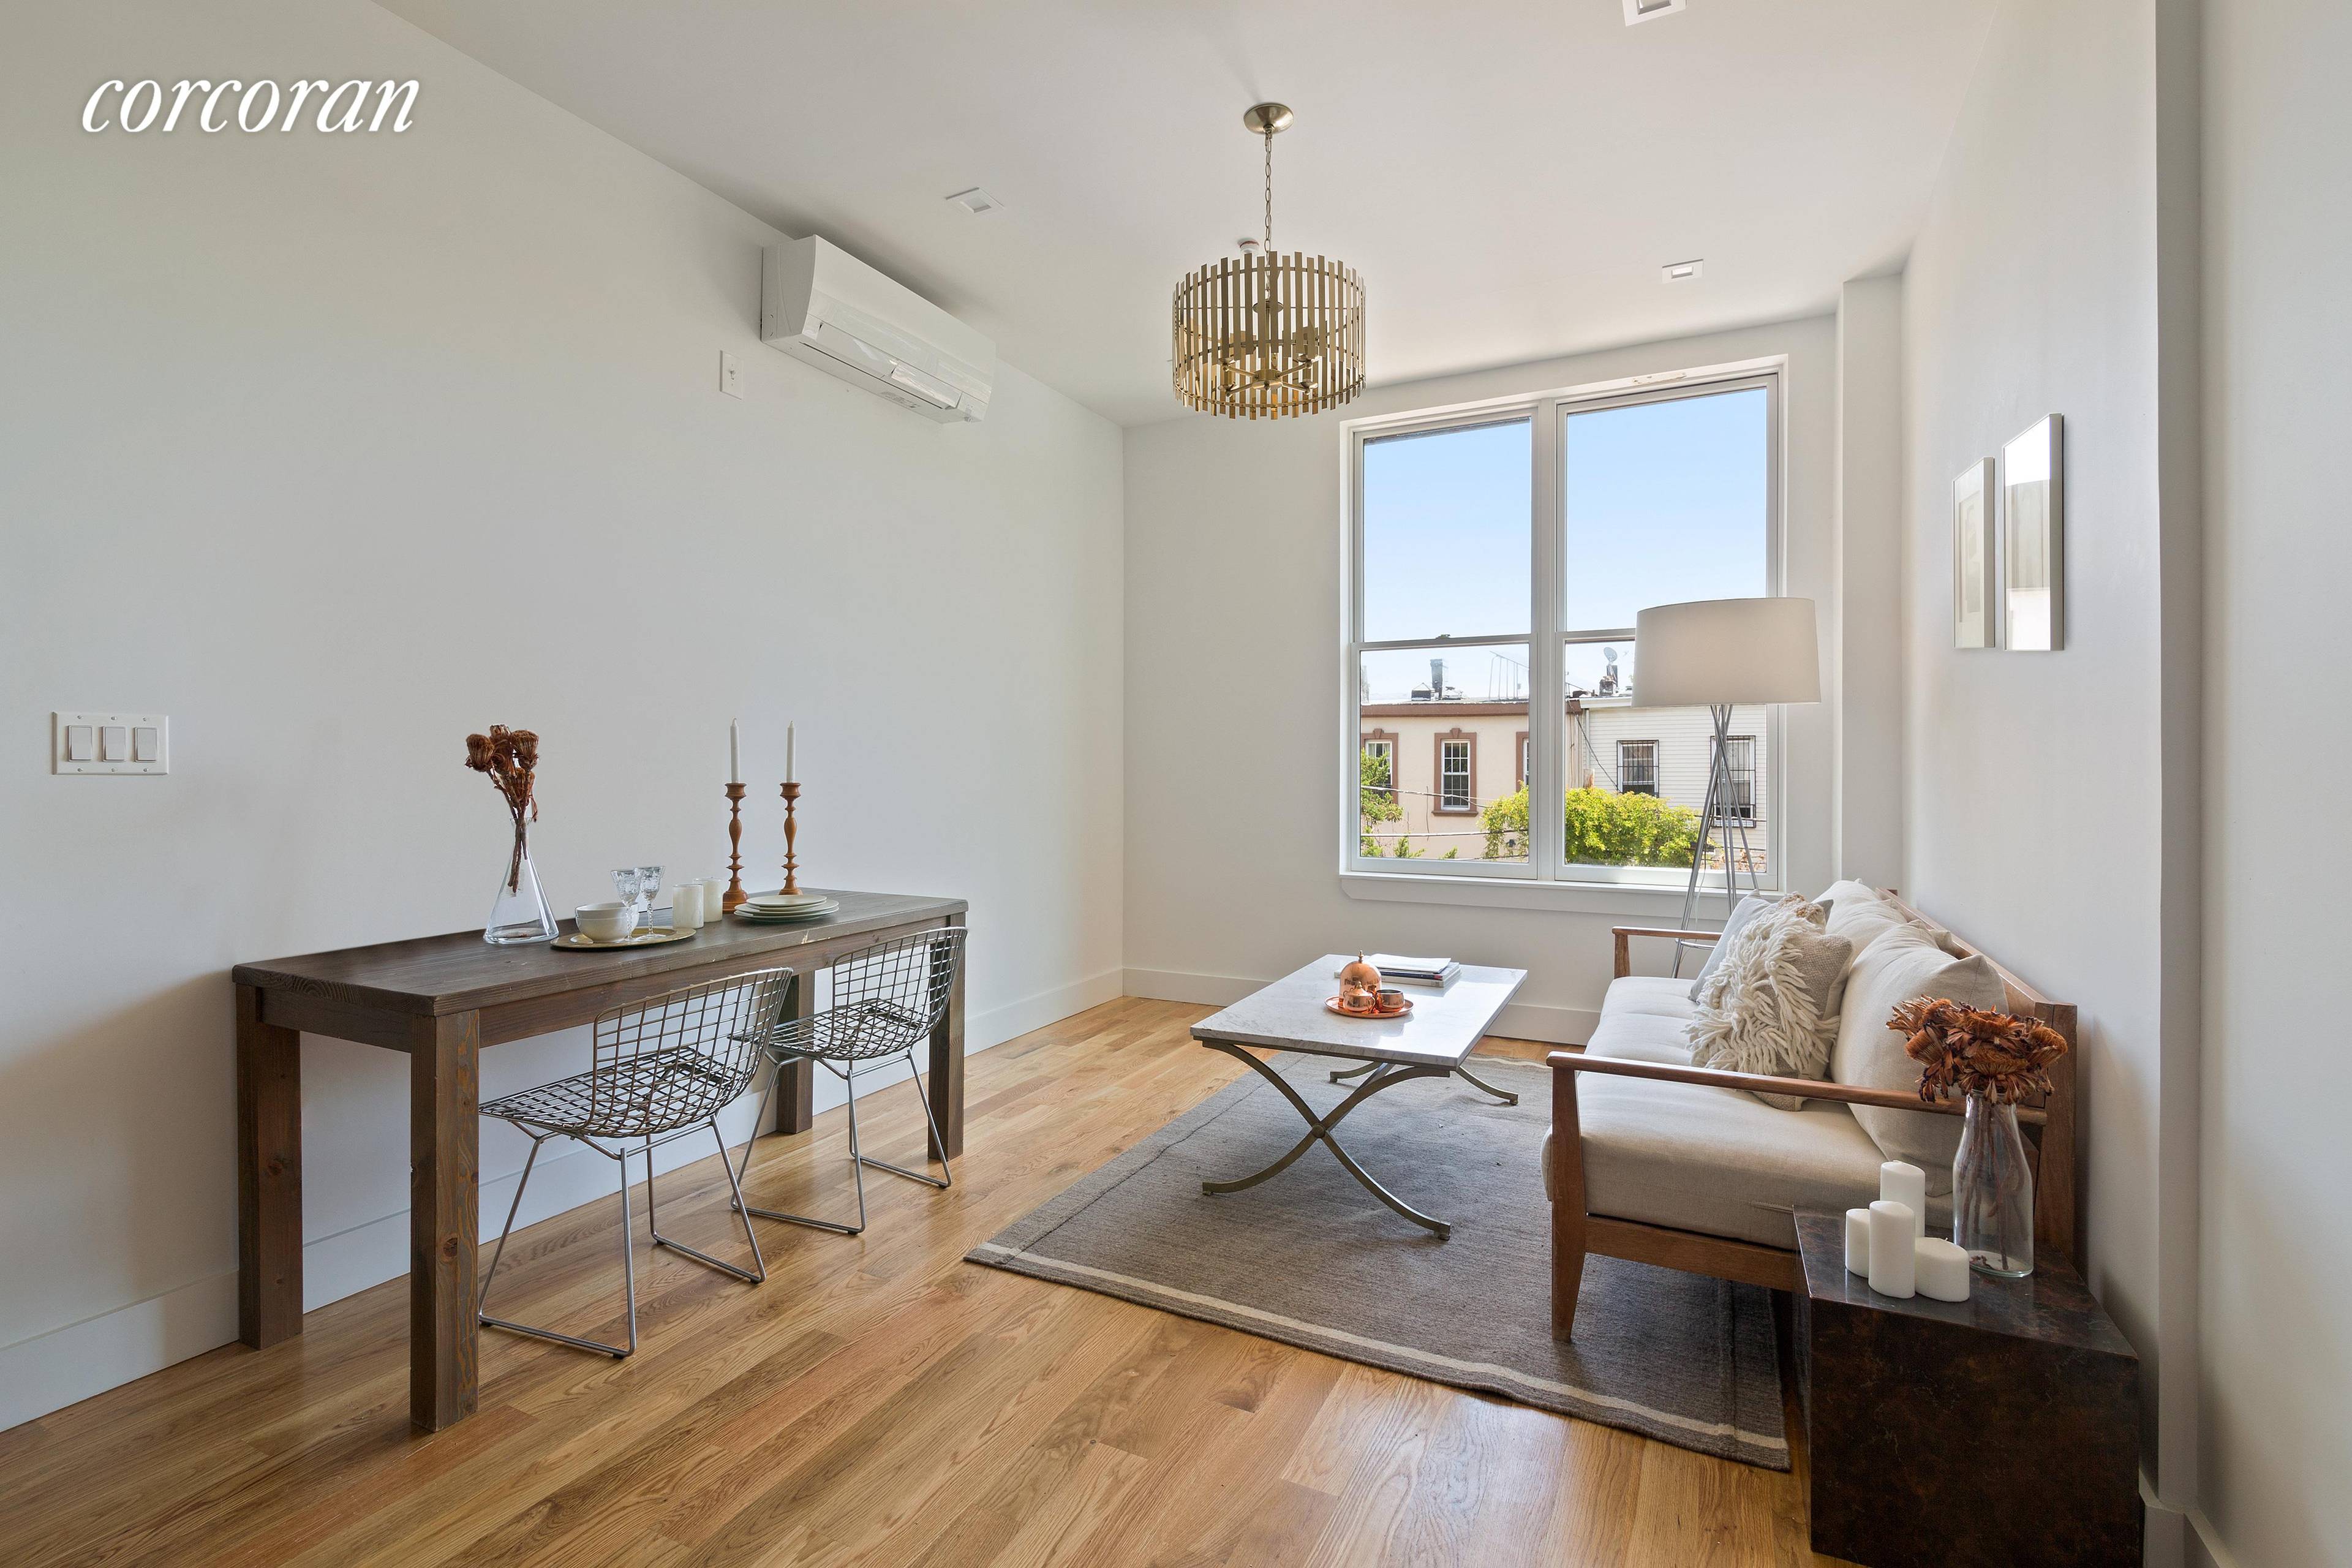 900 Willoughby Ave is a 7 unit boutique condo conversion located in the heart of prime Bushwick, offering a mix of studio and one and two bedroom layouts.